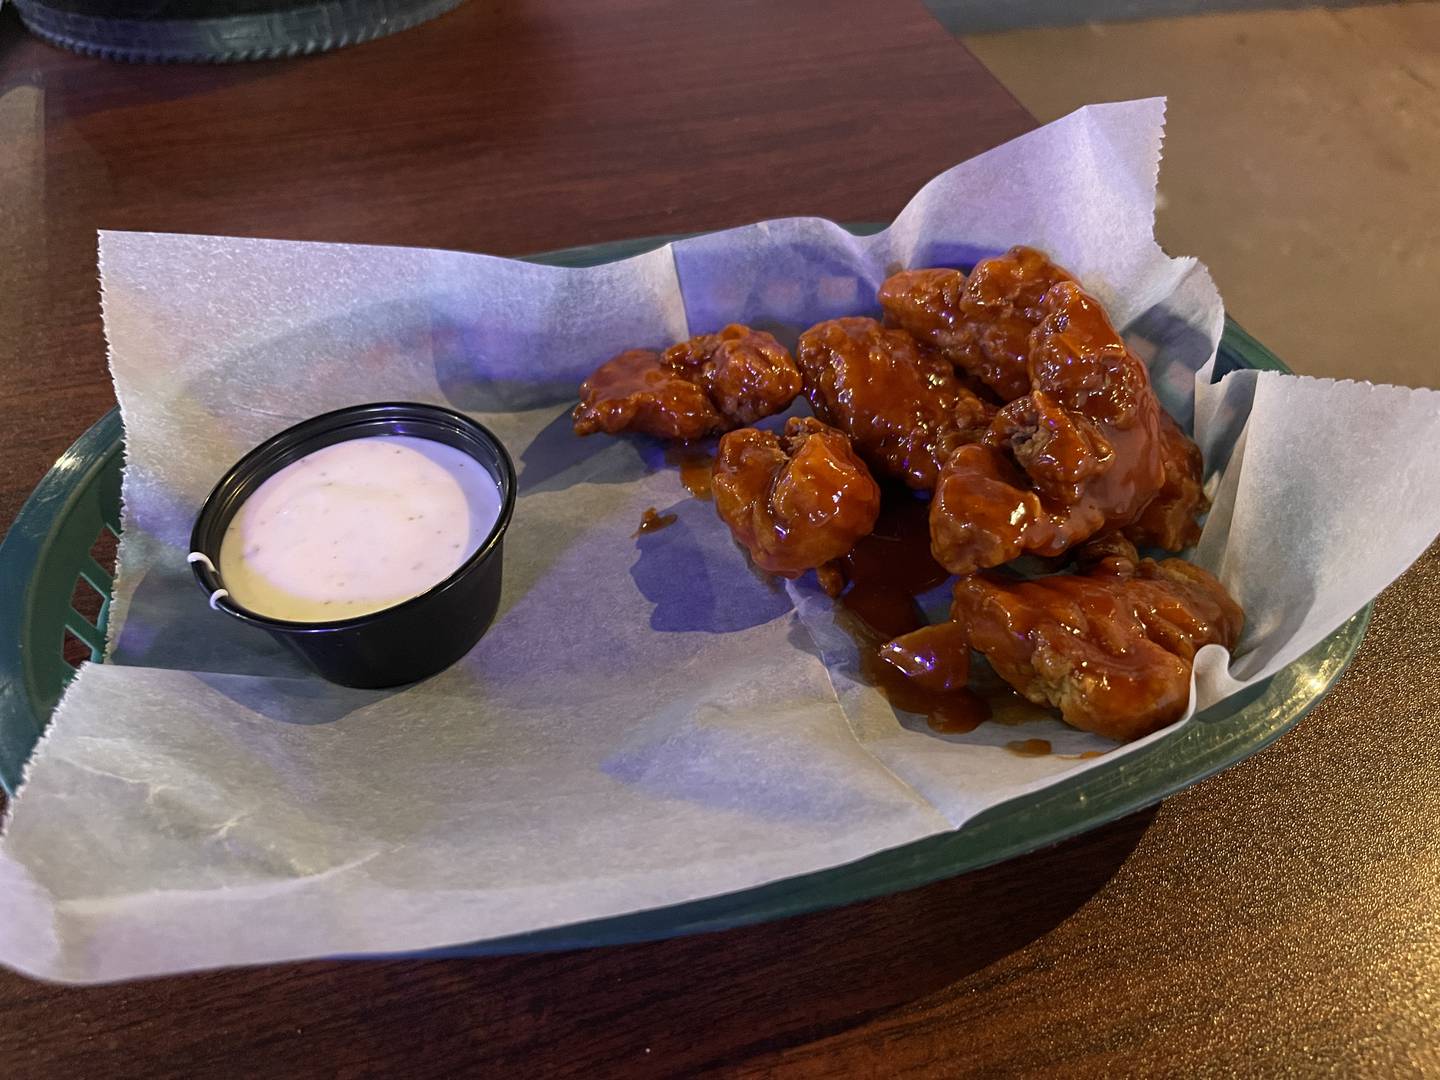 Spicy barbecue wings at Offsides Sports Bar and Grill pair great with ranch, and have some nice heat, but are not too spicy. Offsides is a great place to bring friends, as their menu offers a wide variety and has something for everyone.